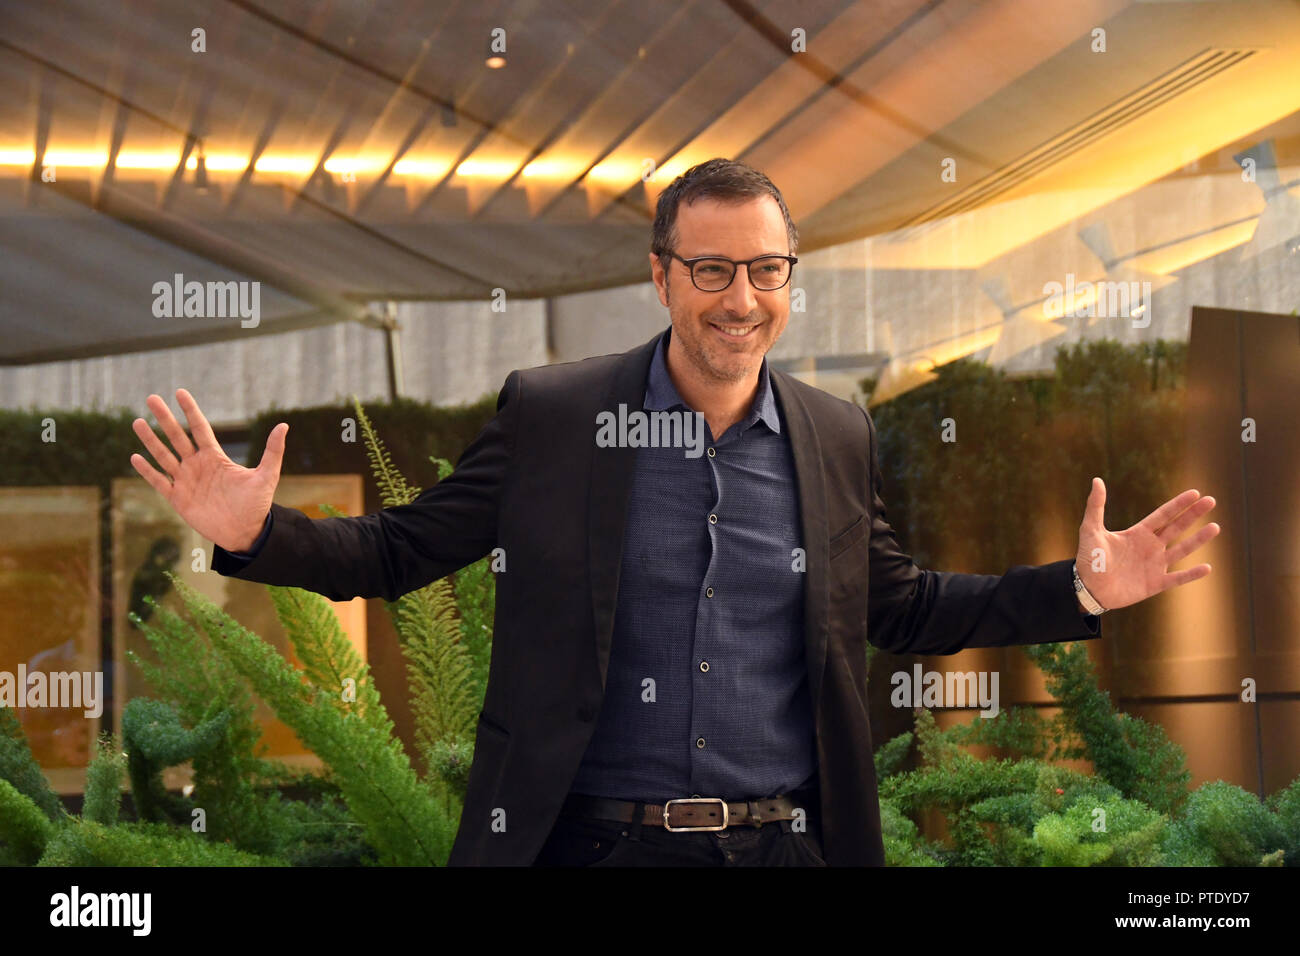 Rome Italy 09 October 2018 - Hotel le Mèridien Visconti - Presentation Film NESSUNO COME NOI photocall Luca Bianchini writer of the novel that was made the film Credit: Giuseppe Andidero/Alamy Live News Stock Photo